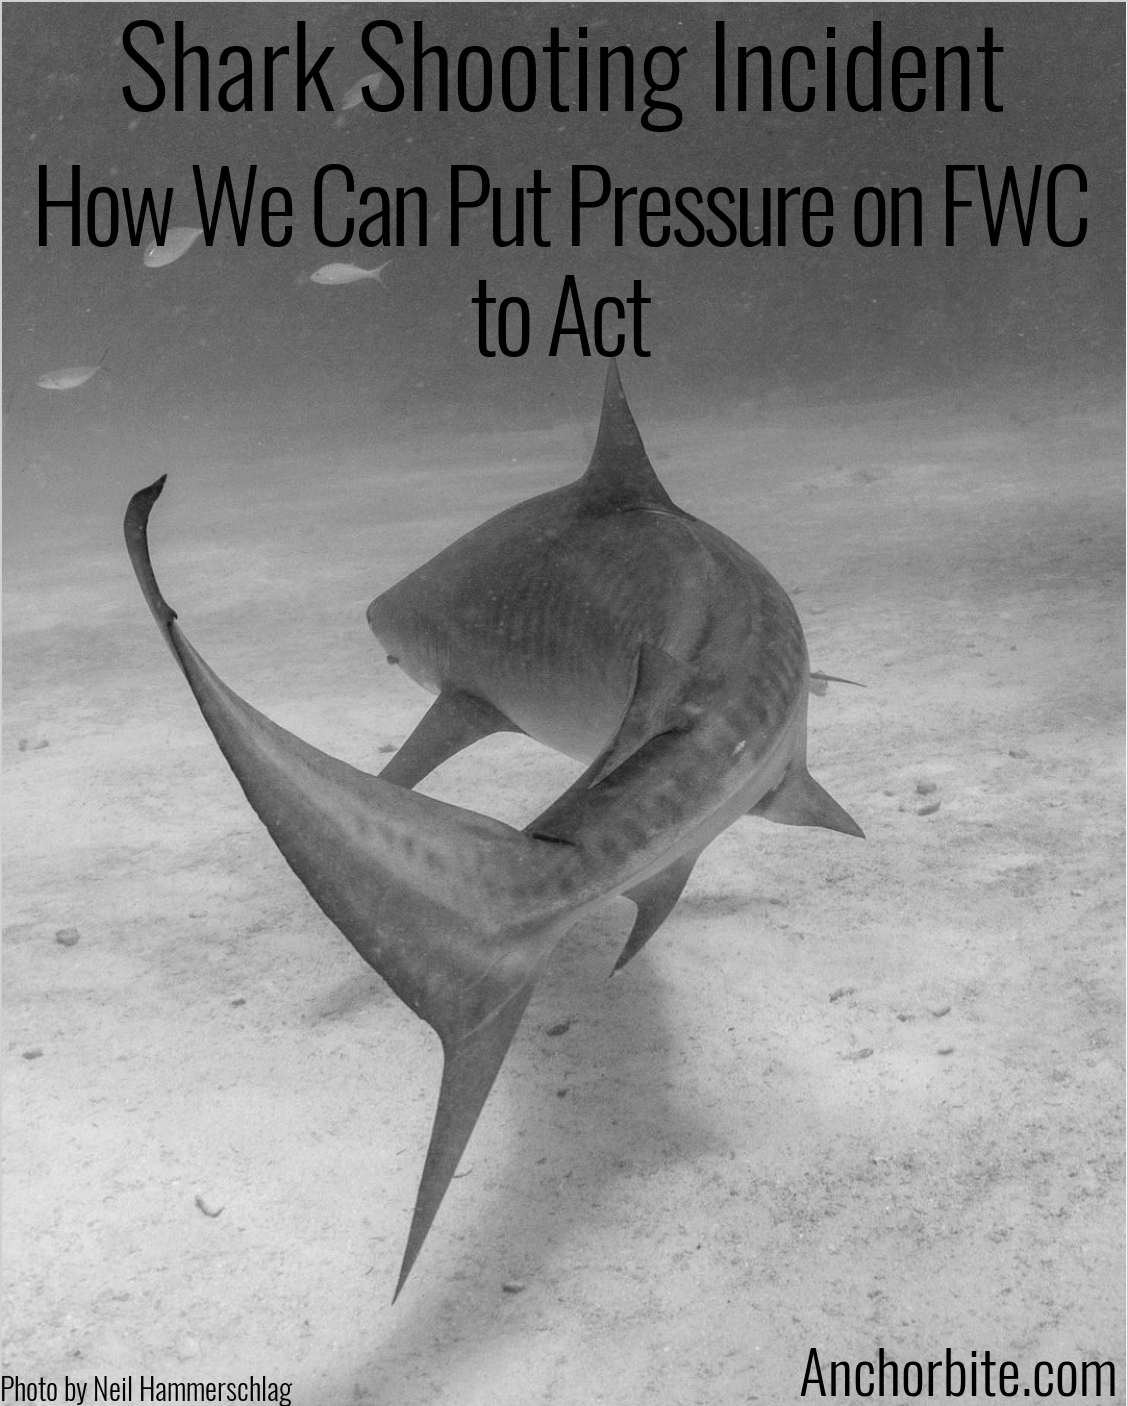 Shark Shooting Incident and How We Can Put Pressure on FWC to Act